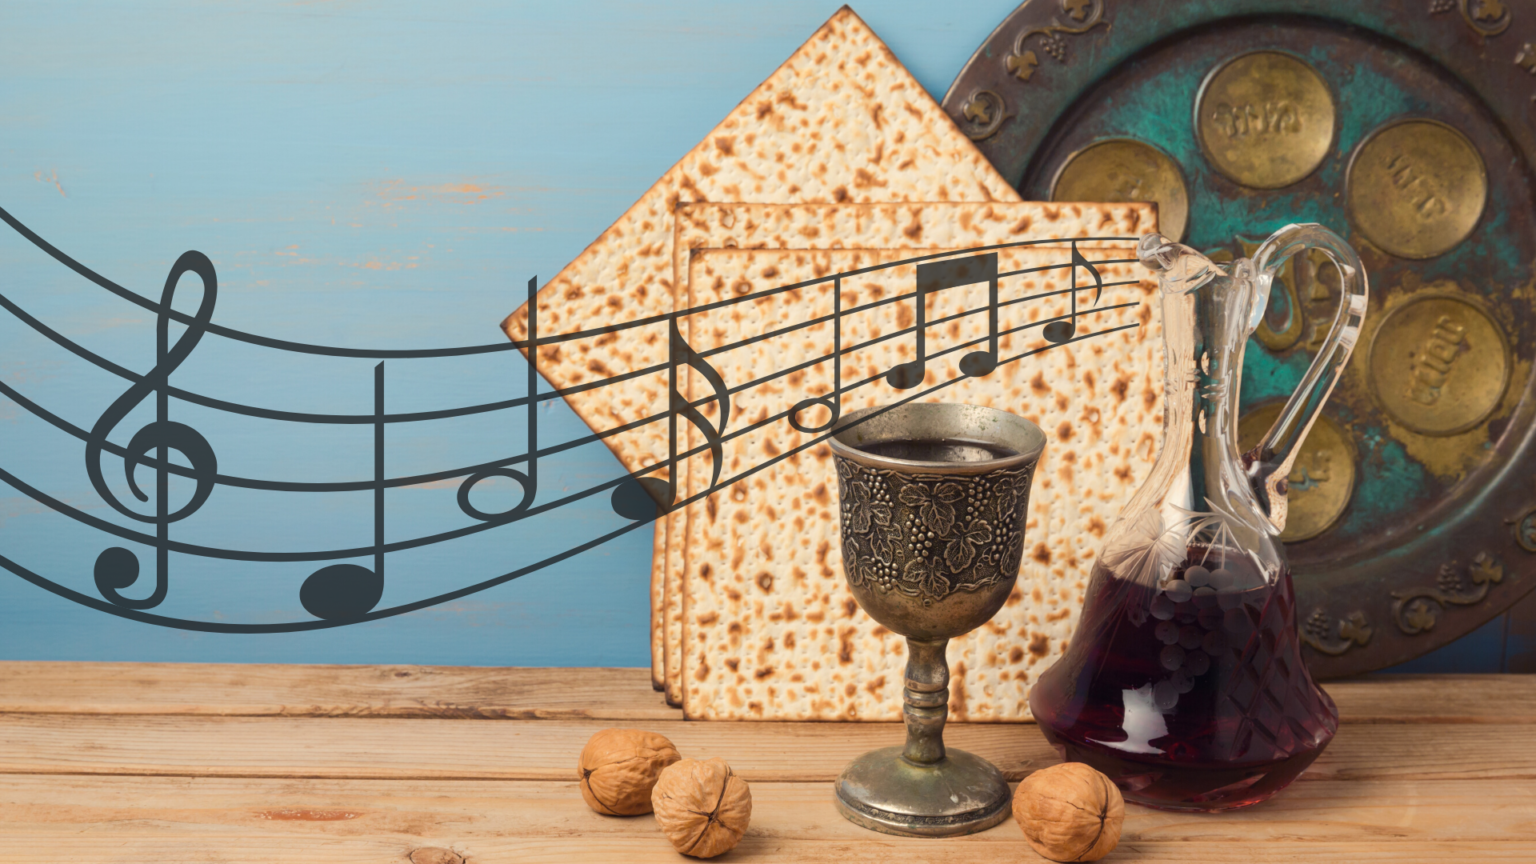 Songs and Stories for the Passover Season led by Rabbi Gimbel